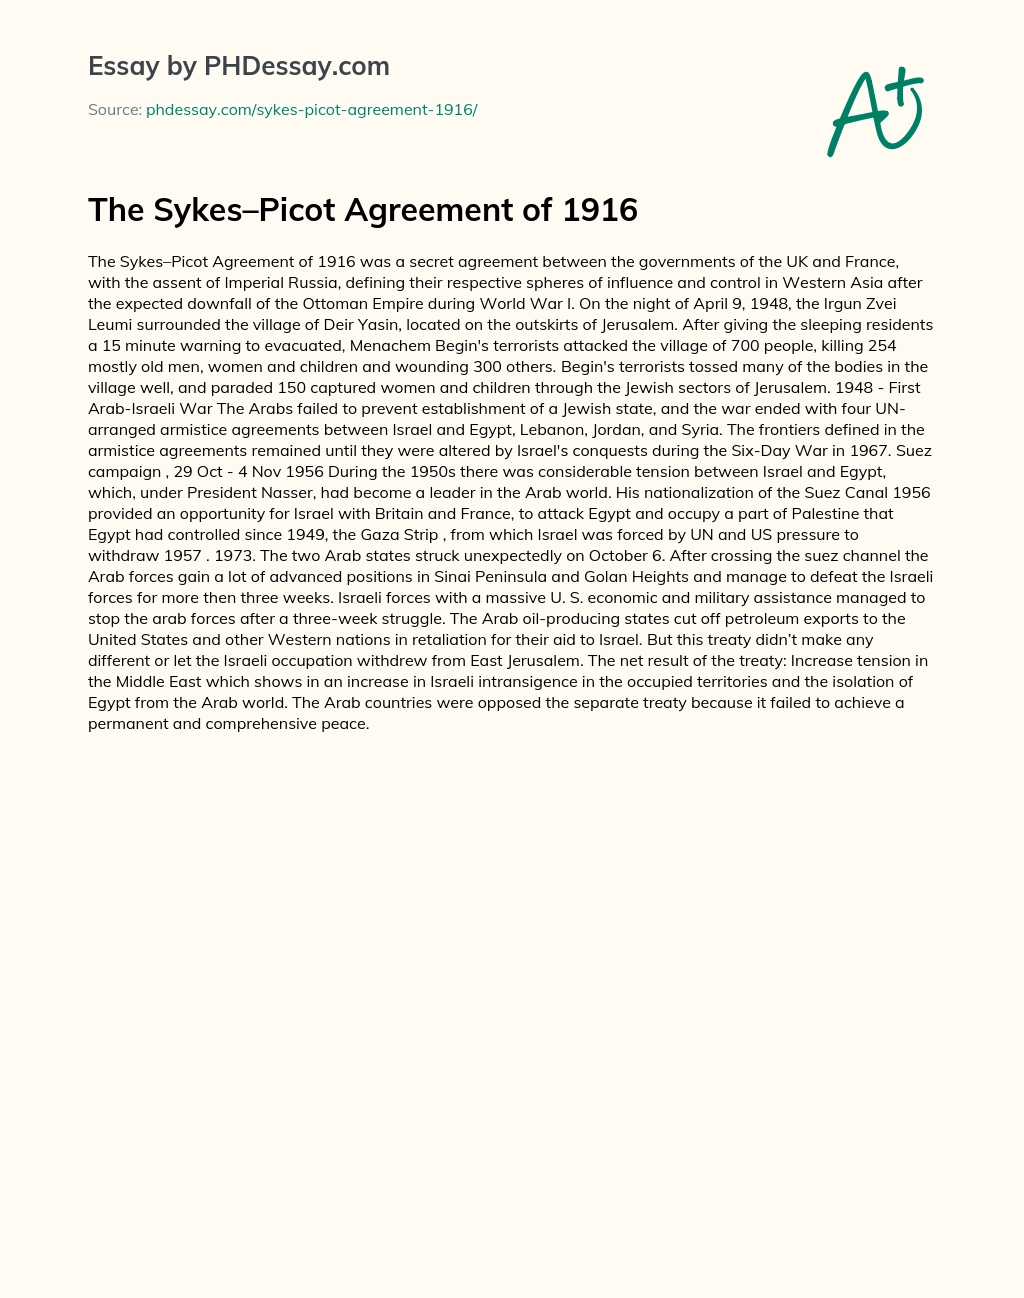 The Sykes–Picot Agreement of 1916 essay